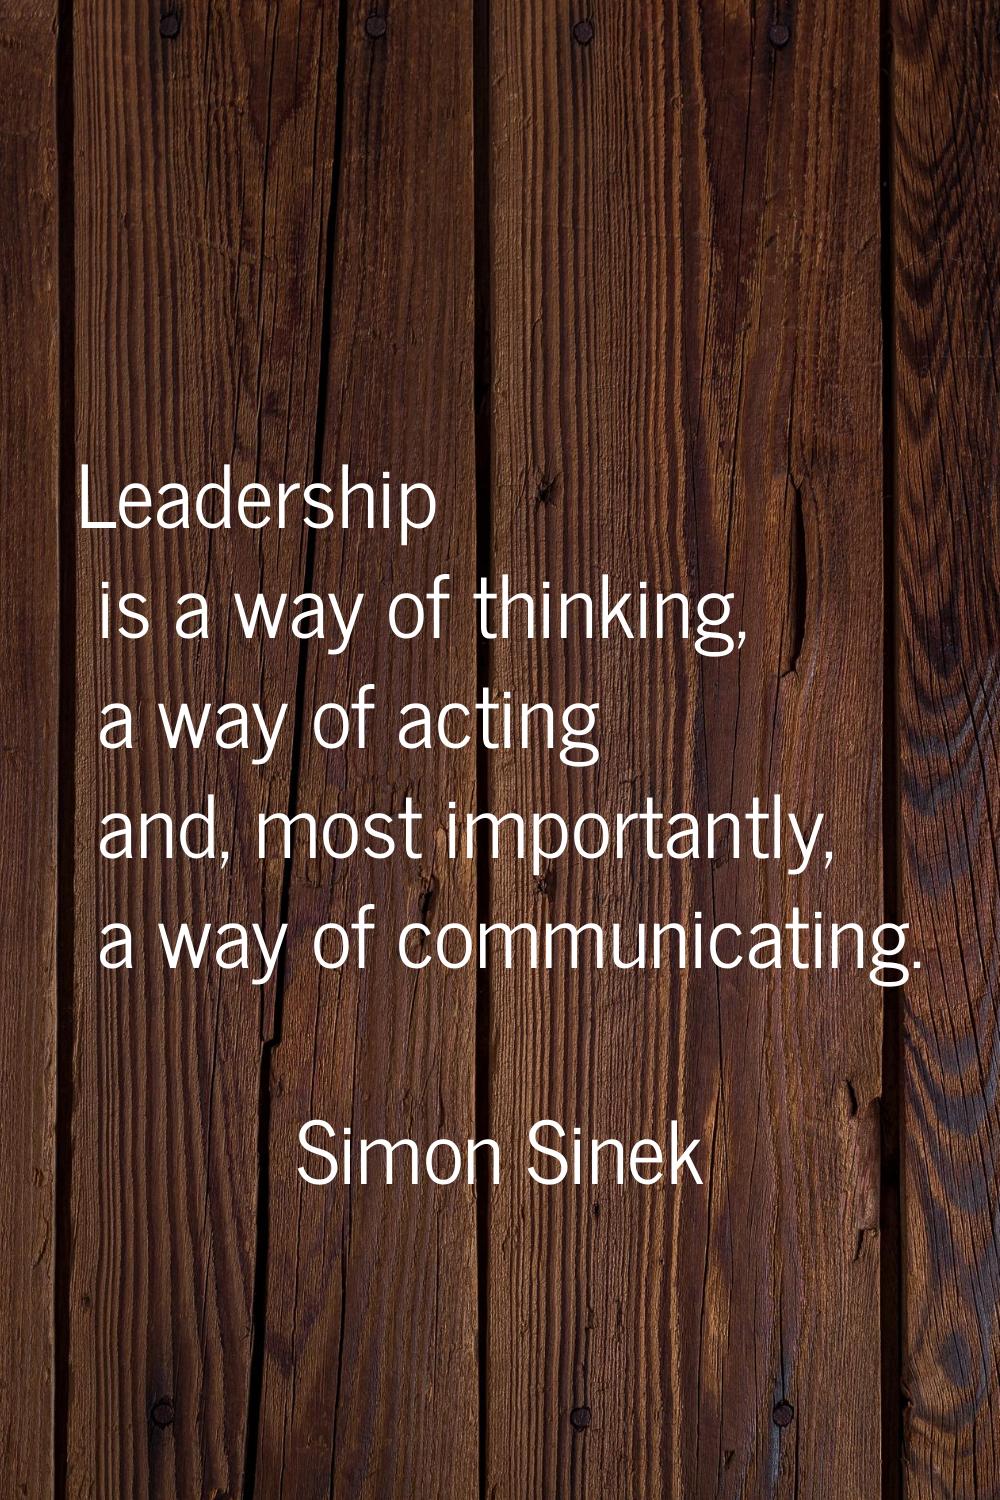 Leadership is a way of thinking, a way of acting and, most importantly, a way of communicating.